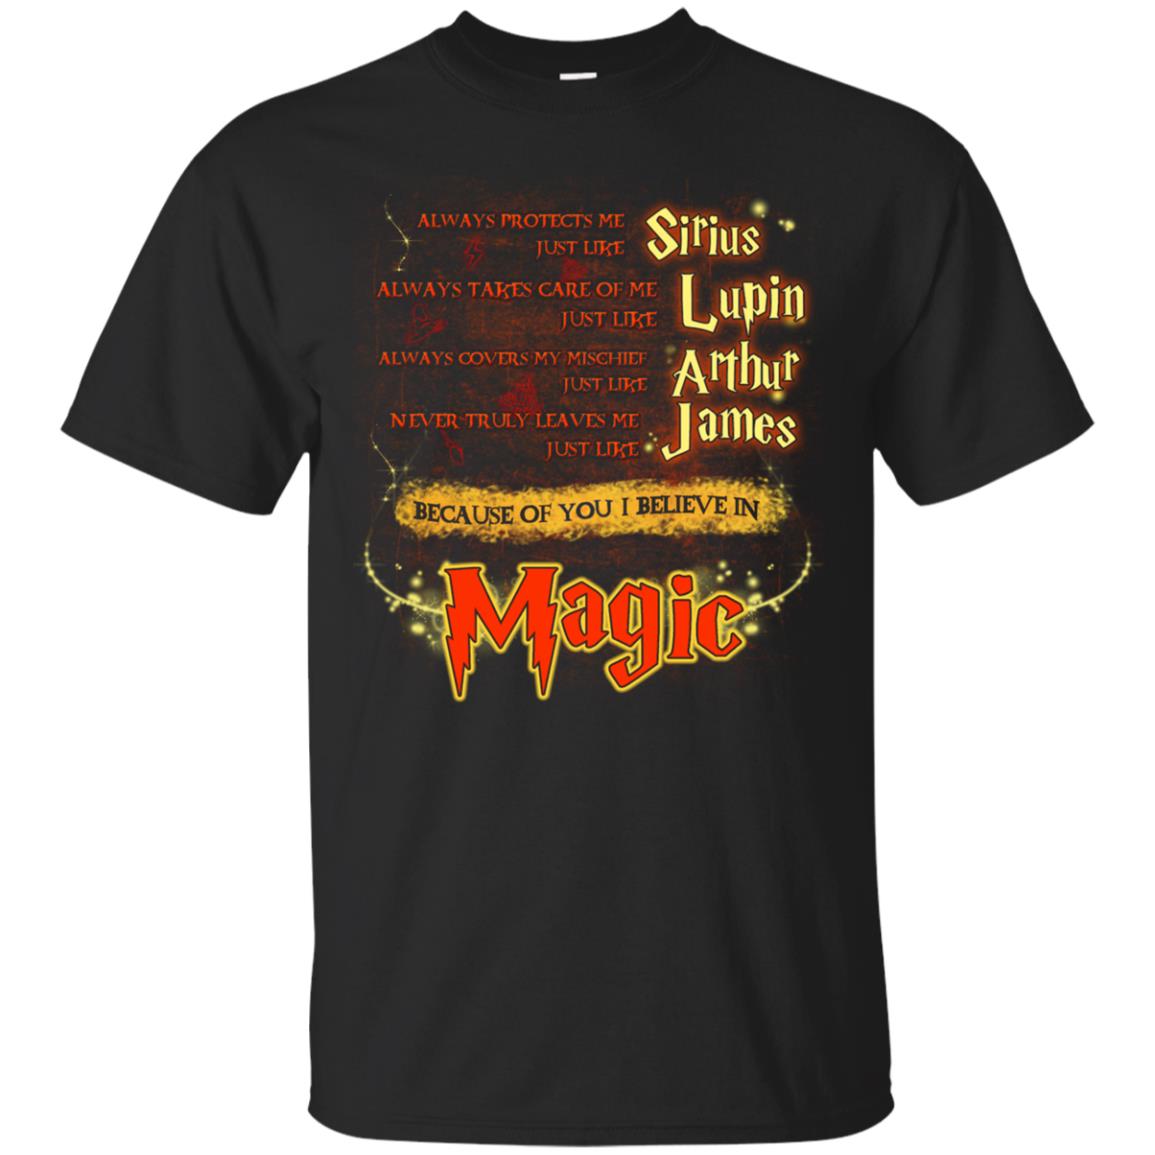 Always Protects Me Just Like Sirius Because Of You I Believe In Magic Potterhead's Dad Harry Potter ShirtG200 Gildan Ultra Cotton T-Shirt